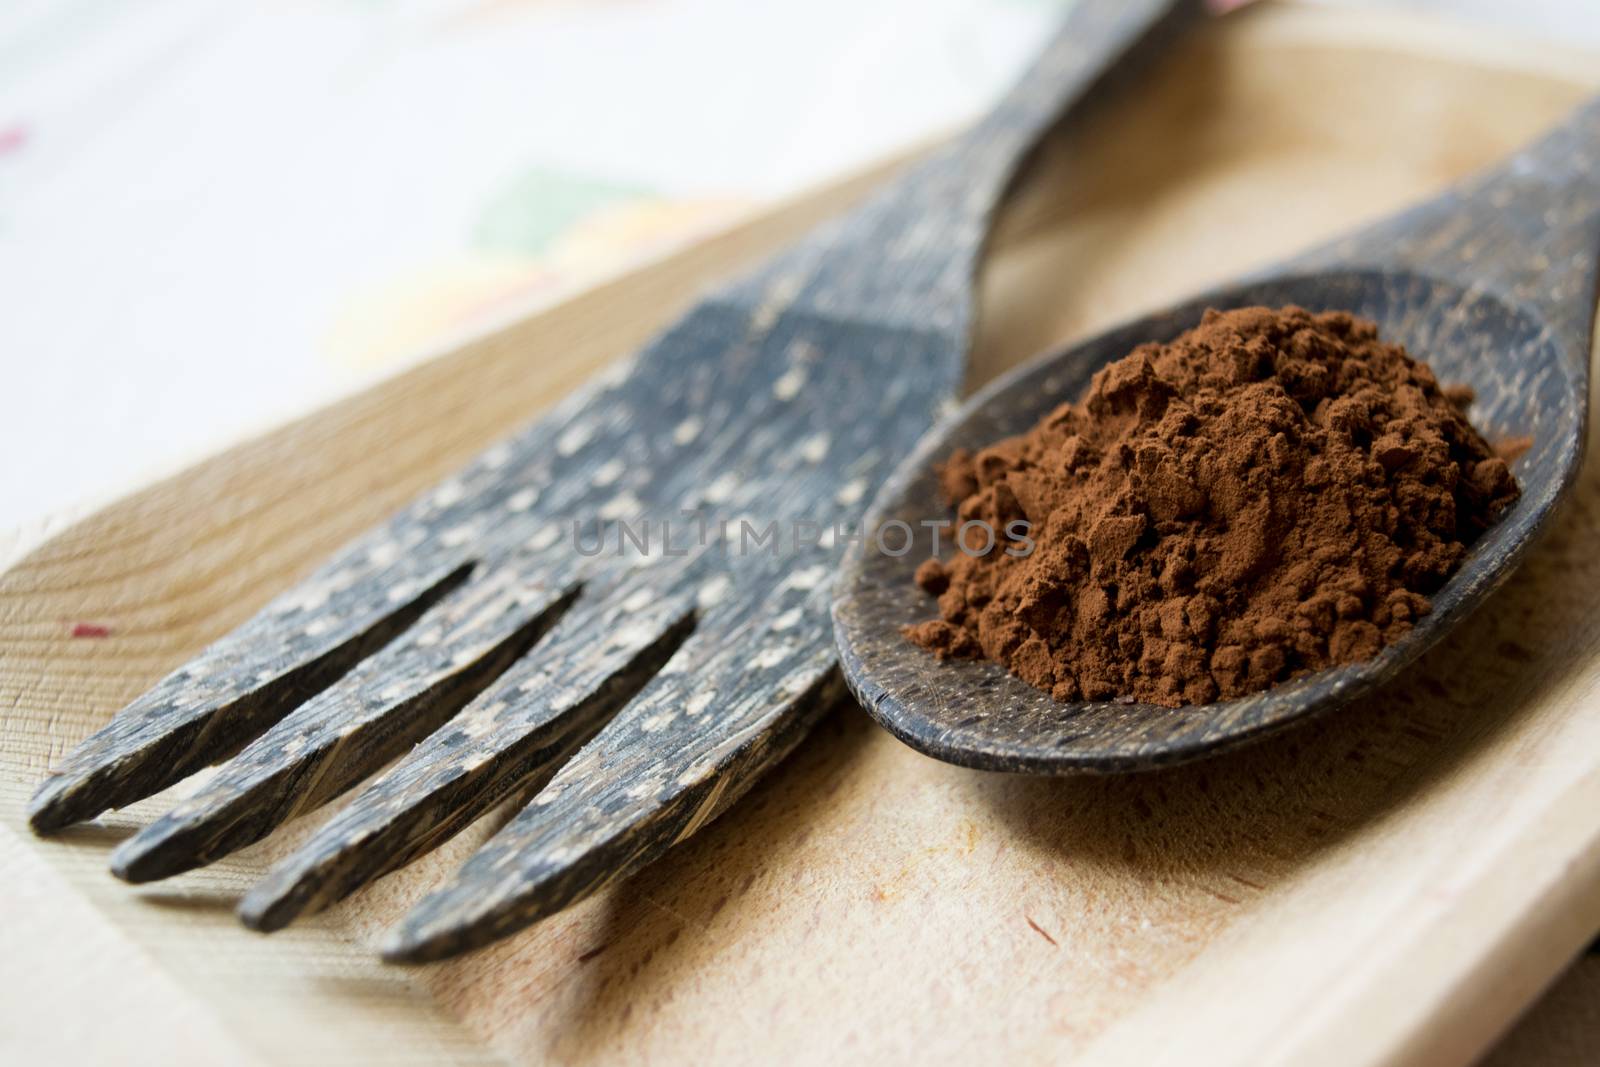 coffee grounds on a wooden spoon near a wooden fork